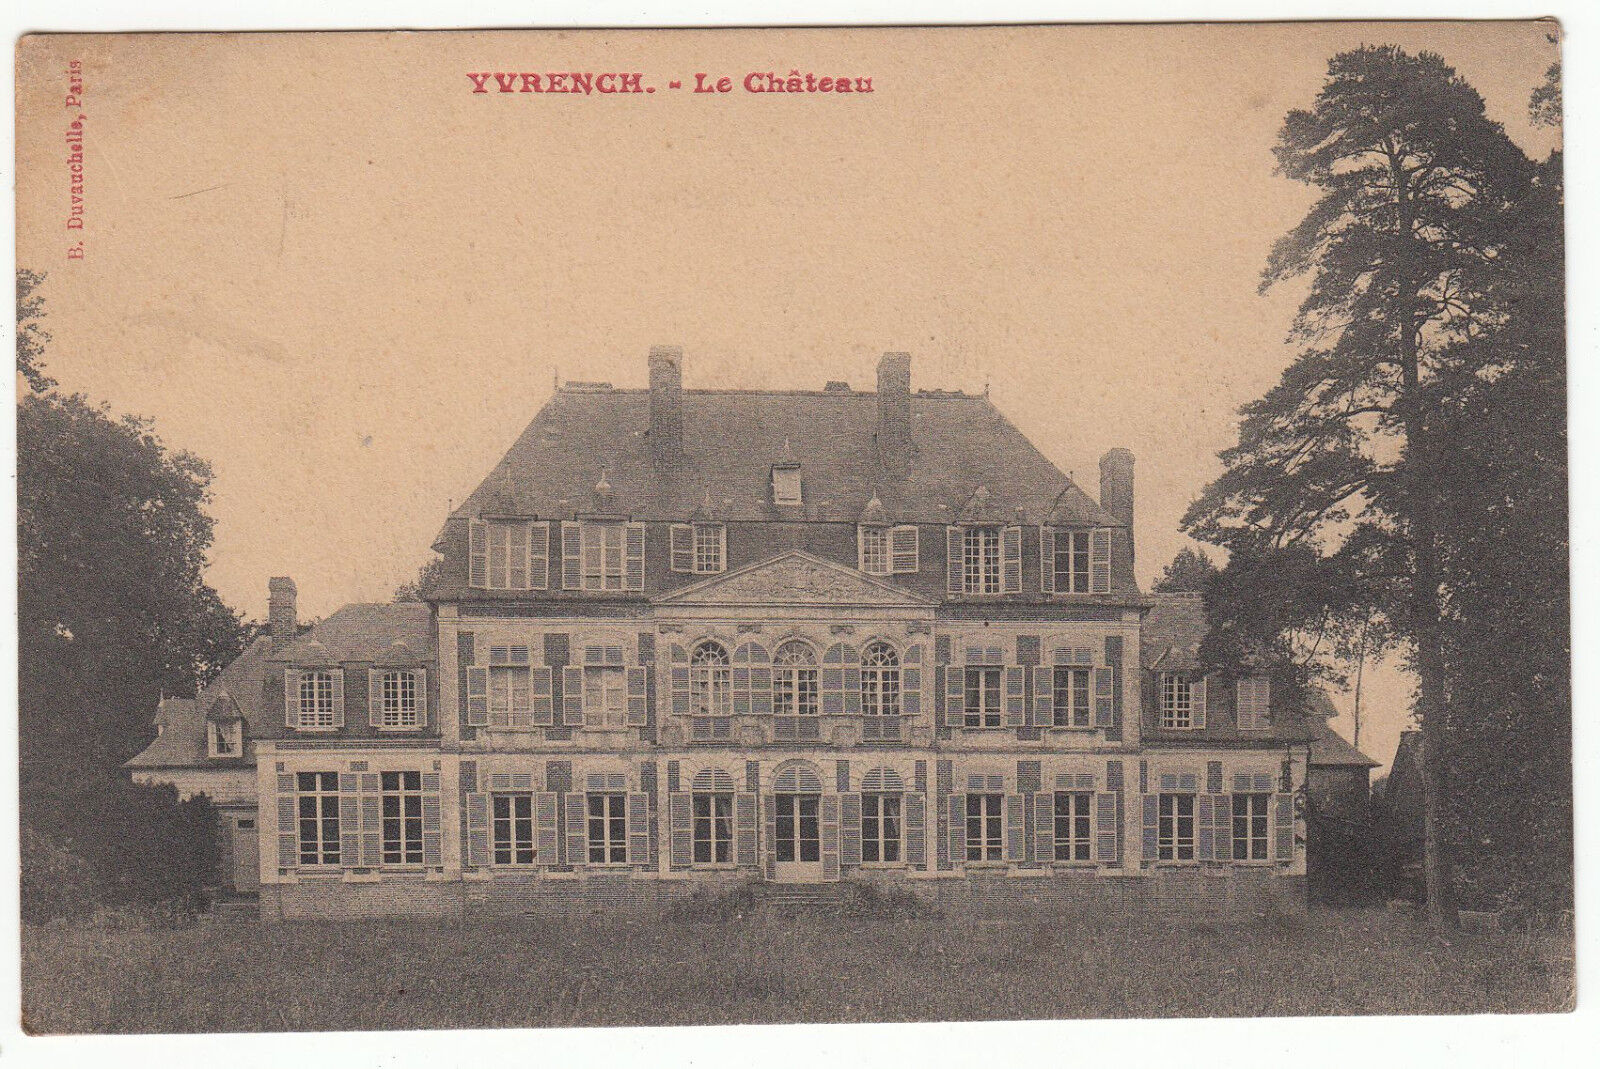 CARTE POSTALE YVRENCH LE CHATEAU 122655447246